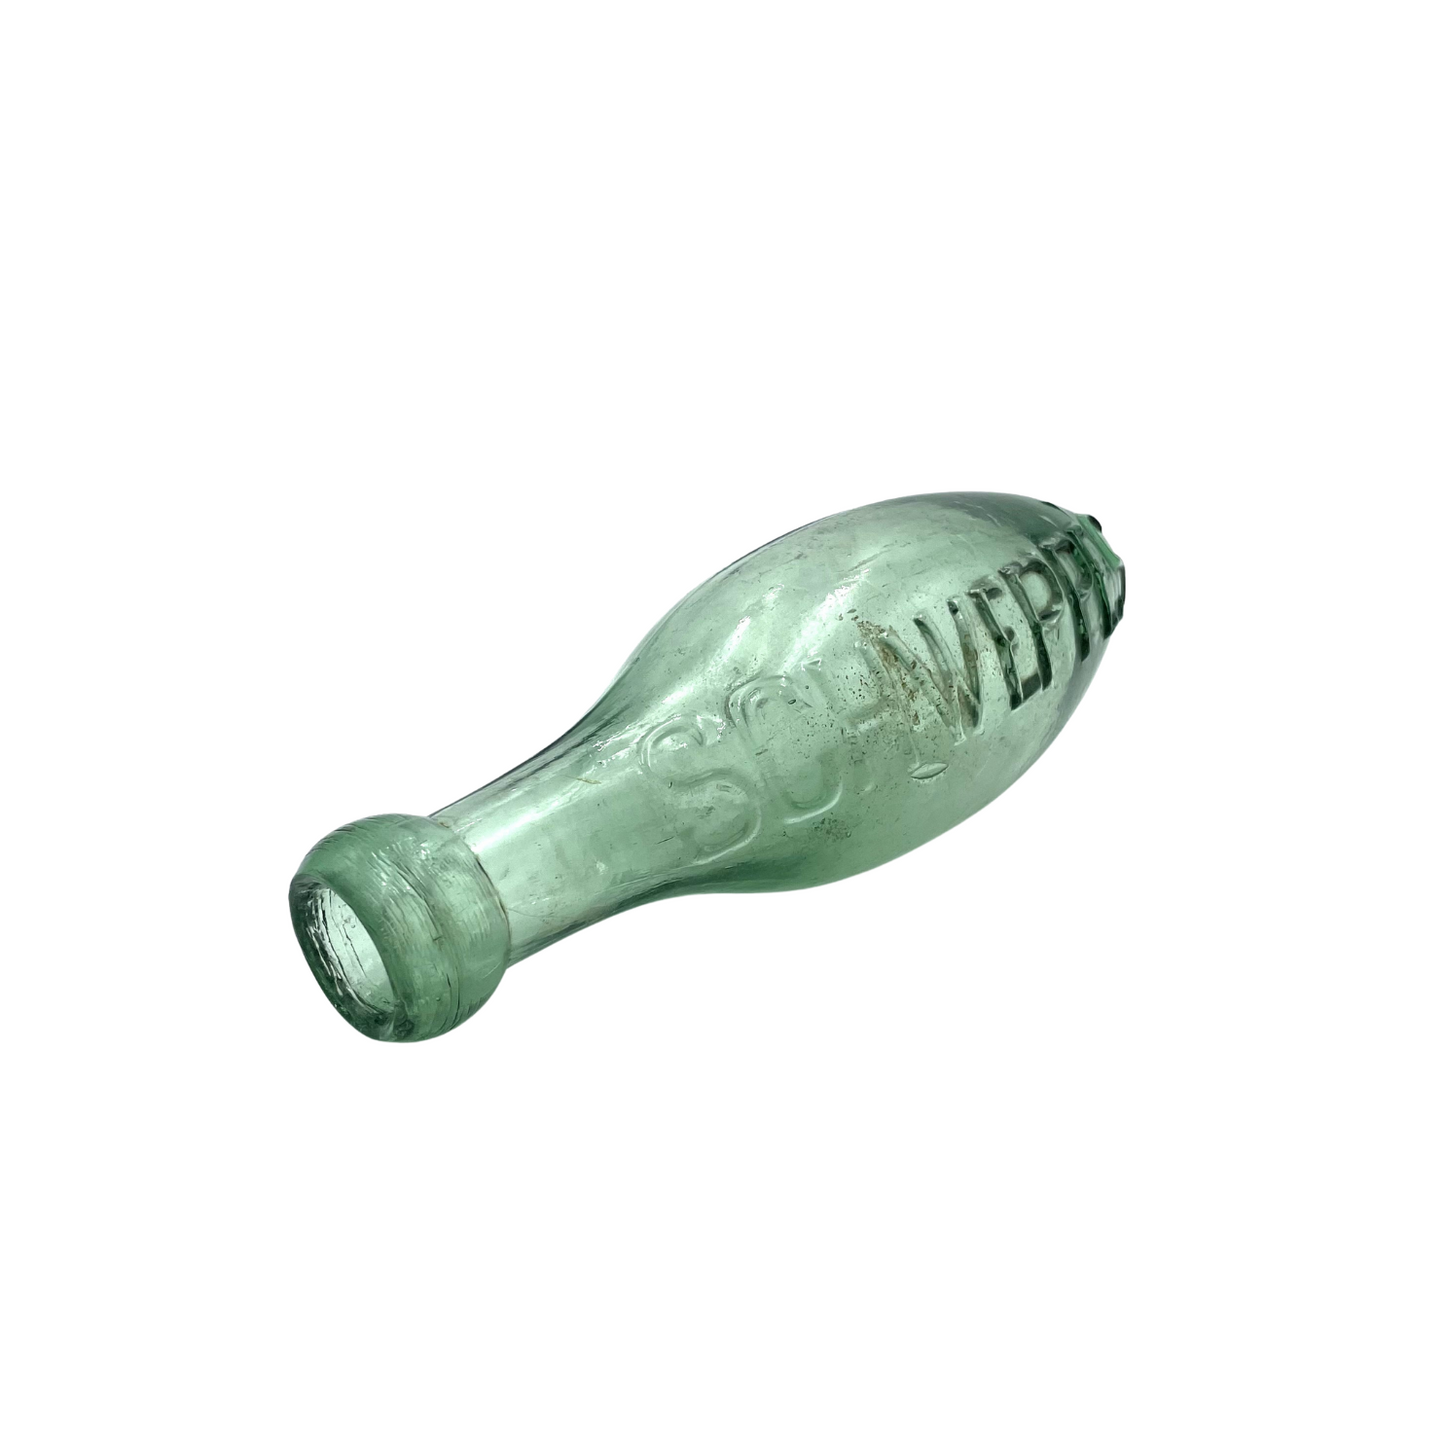 Antique Shweppe's Aerated Water Torpedo Bottle - 18cm